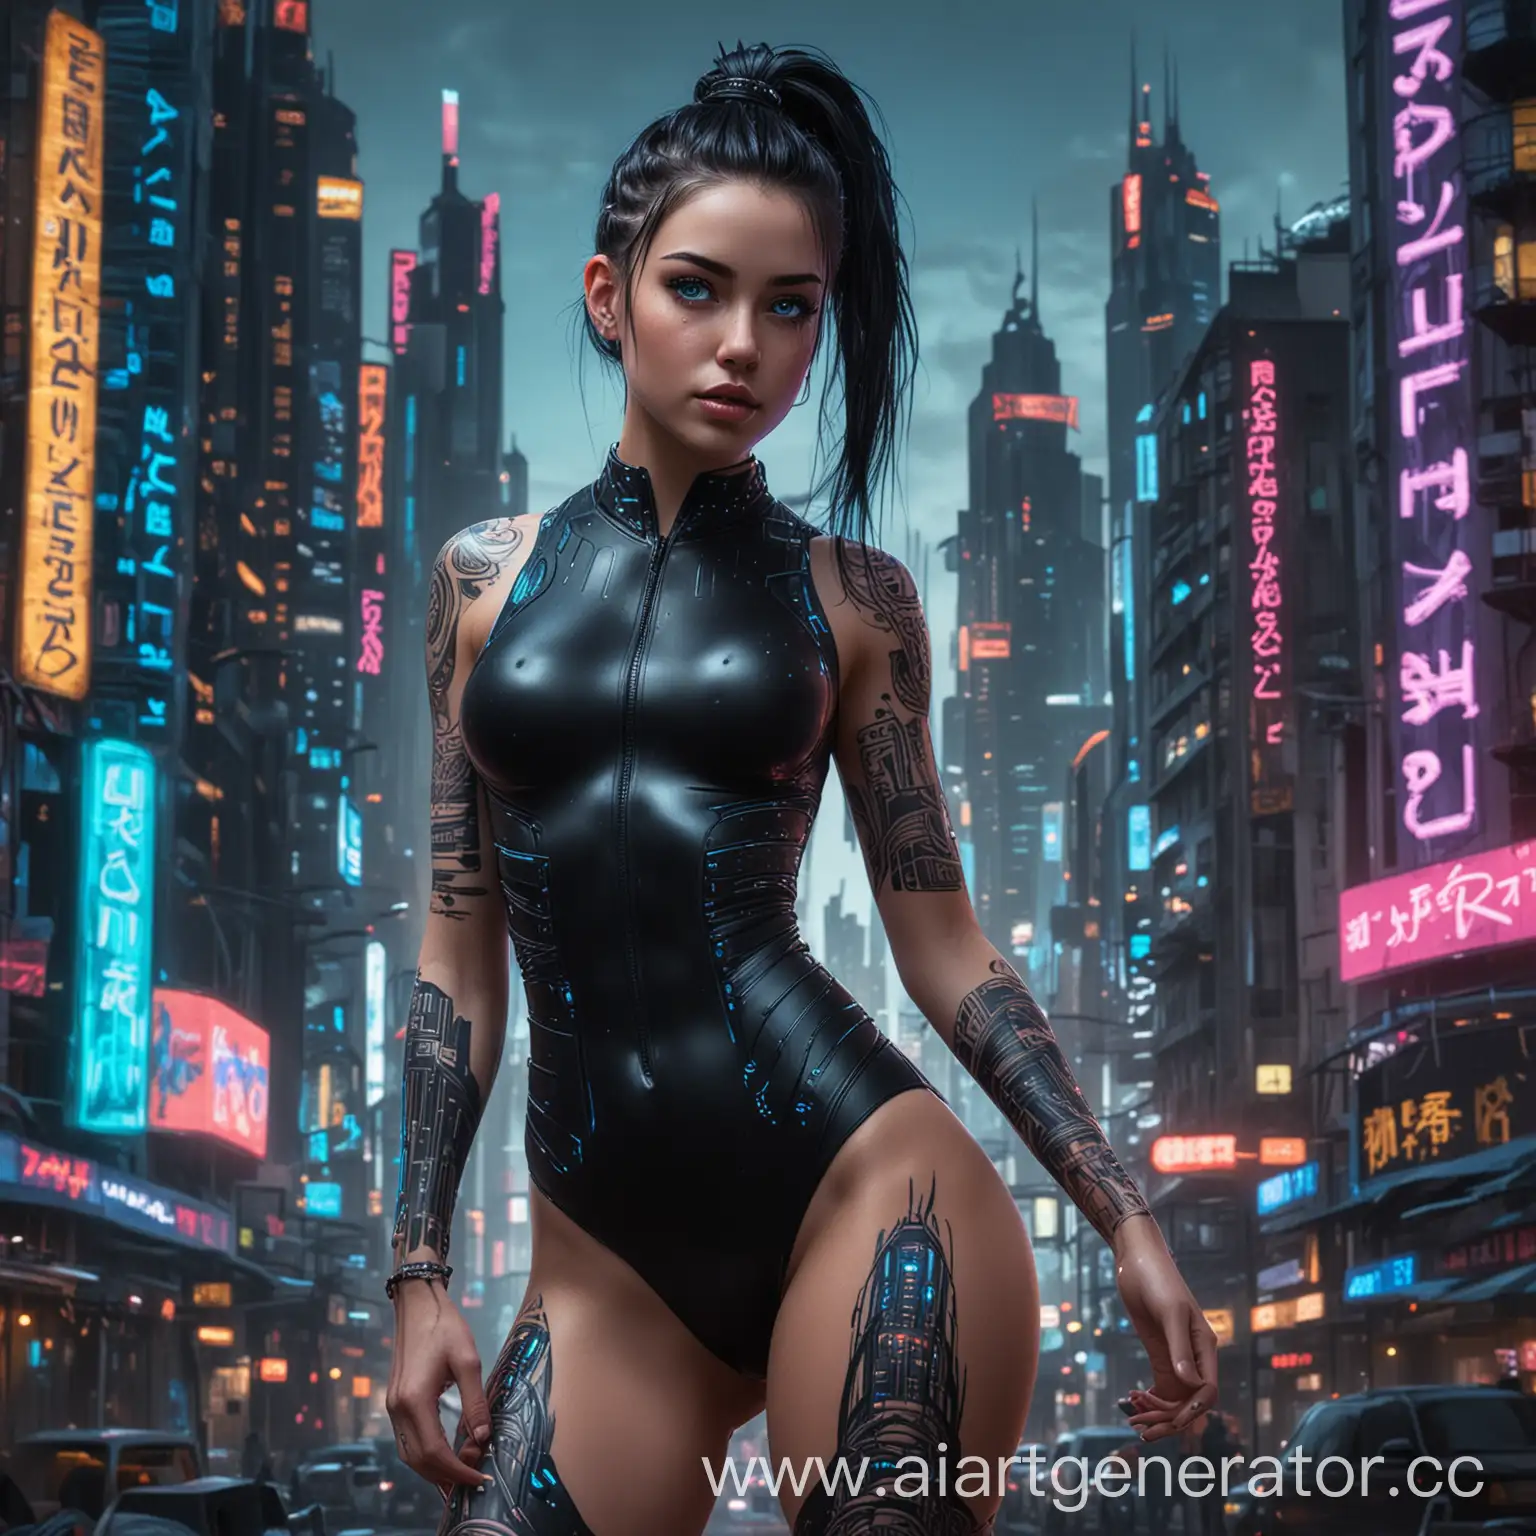 A young woman in her mid-20s, with long black hair styled in braids or a ponytail. She has bright blue eyes that glow in the dark. girl in full height legs visible. She is wearing a form-fitting black bodysuit with neon accents, highlighting her athletic figure and cybernetic enhancements. She has a neural interface on her temple, cybernetic enhancements on her arms, and glowing tattoos on her body that change color and pattern depending on her mood and activity. Her expression is confident and determined, with a hint of rebelliousness. The background is a futuristic cityscape at night, with towering skyscrapers and neon signs.